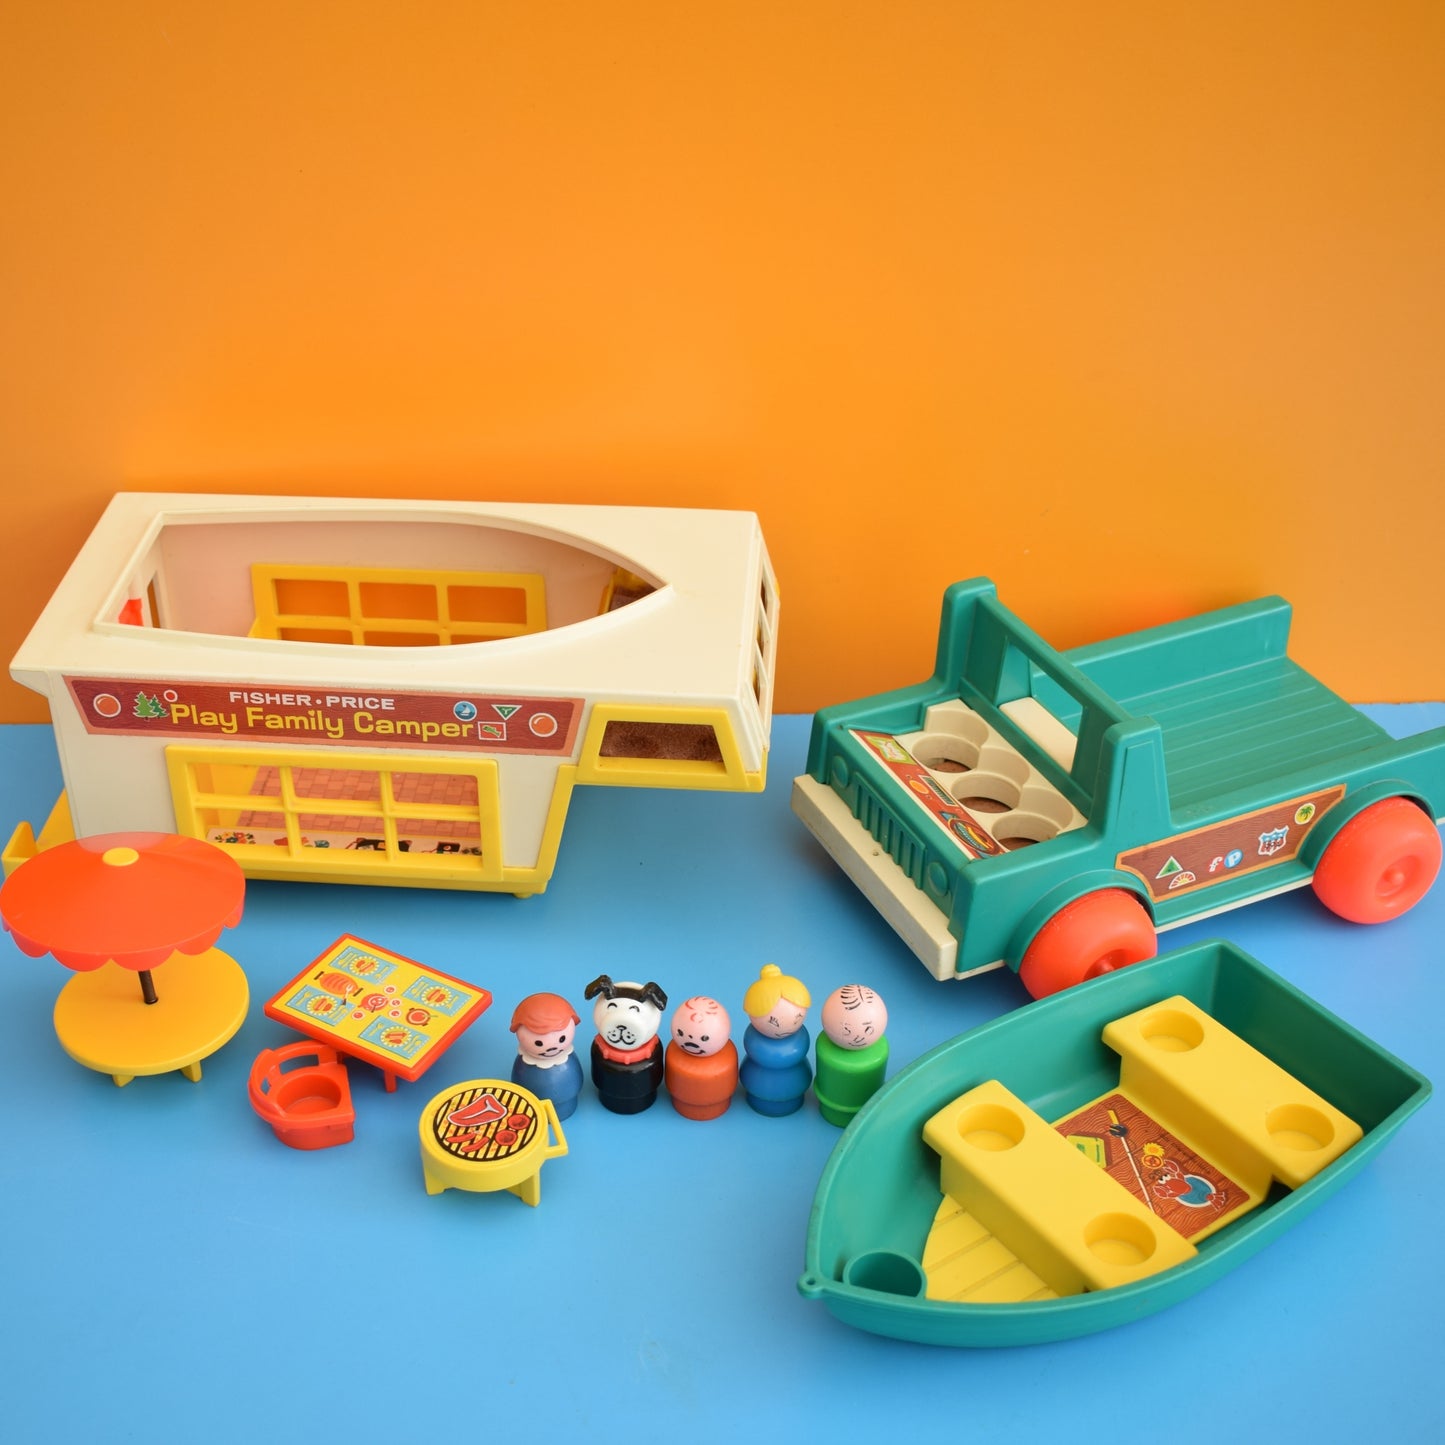 Vintage 1980s Fisher Price - Play Family Camper